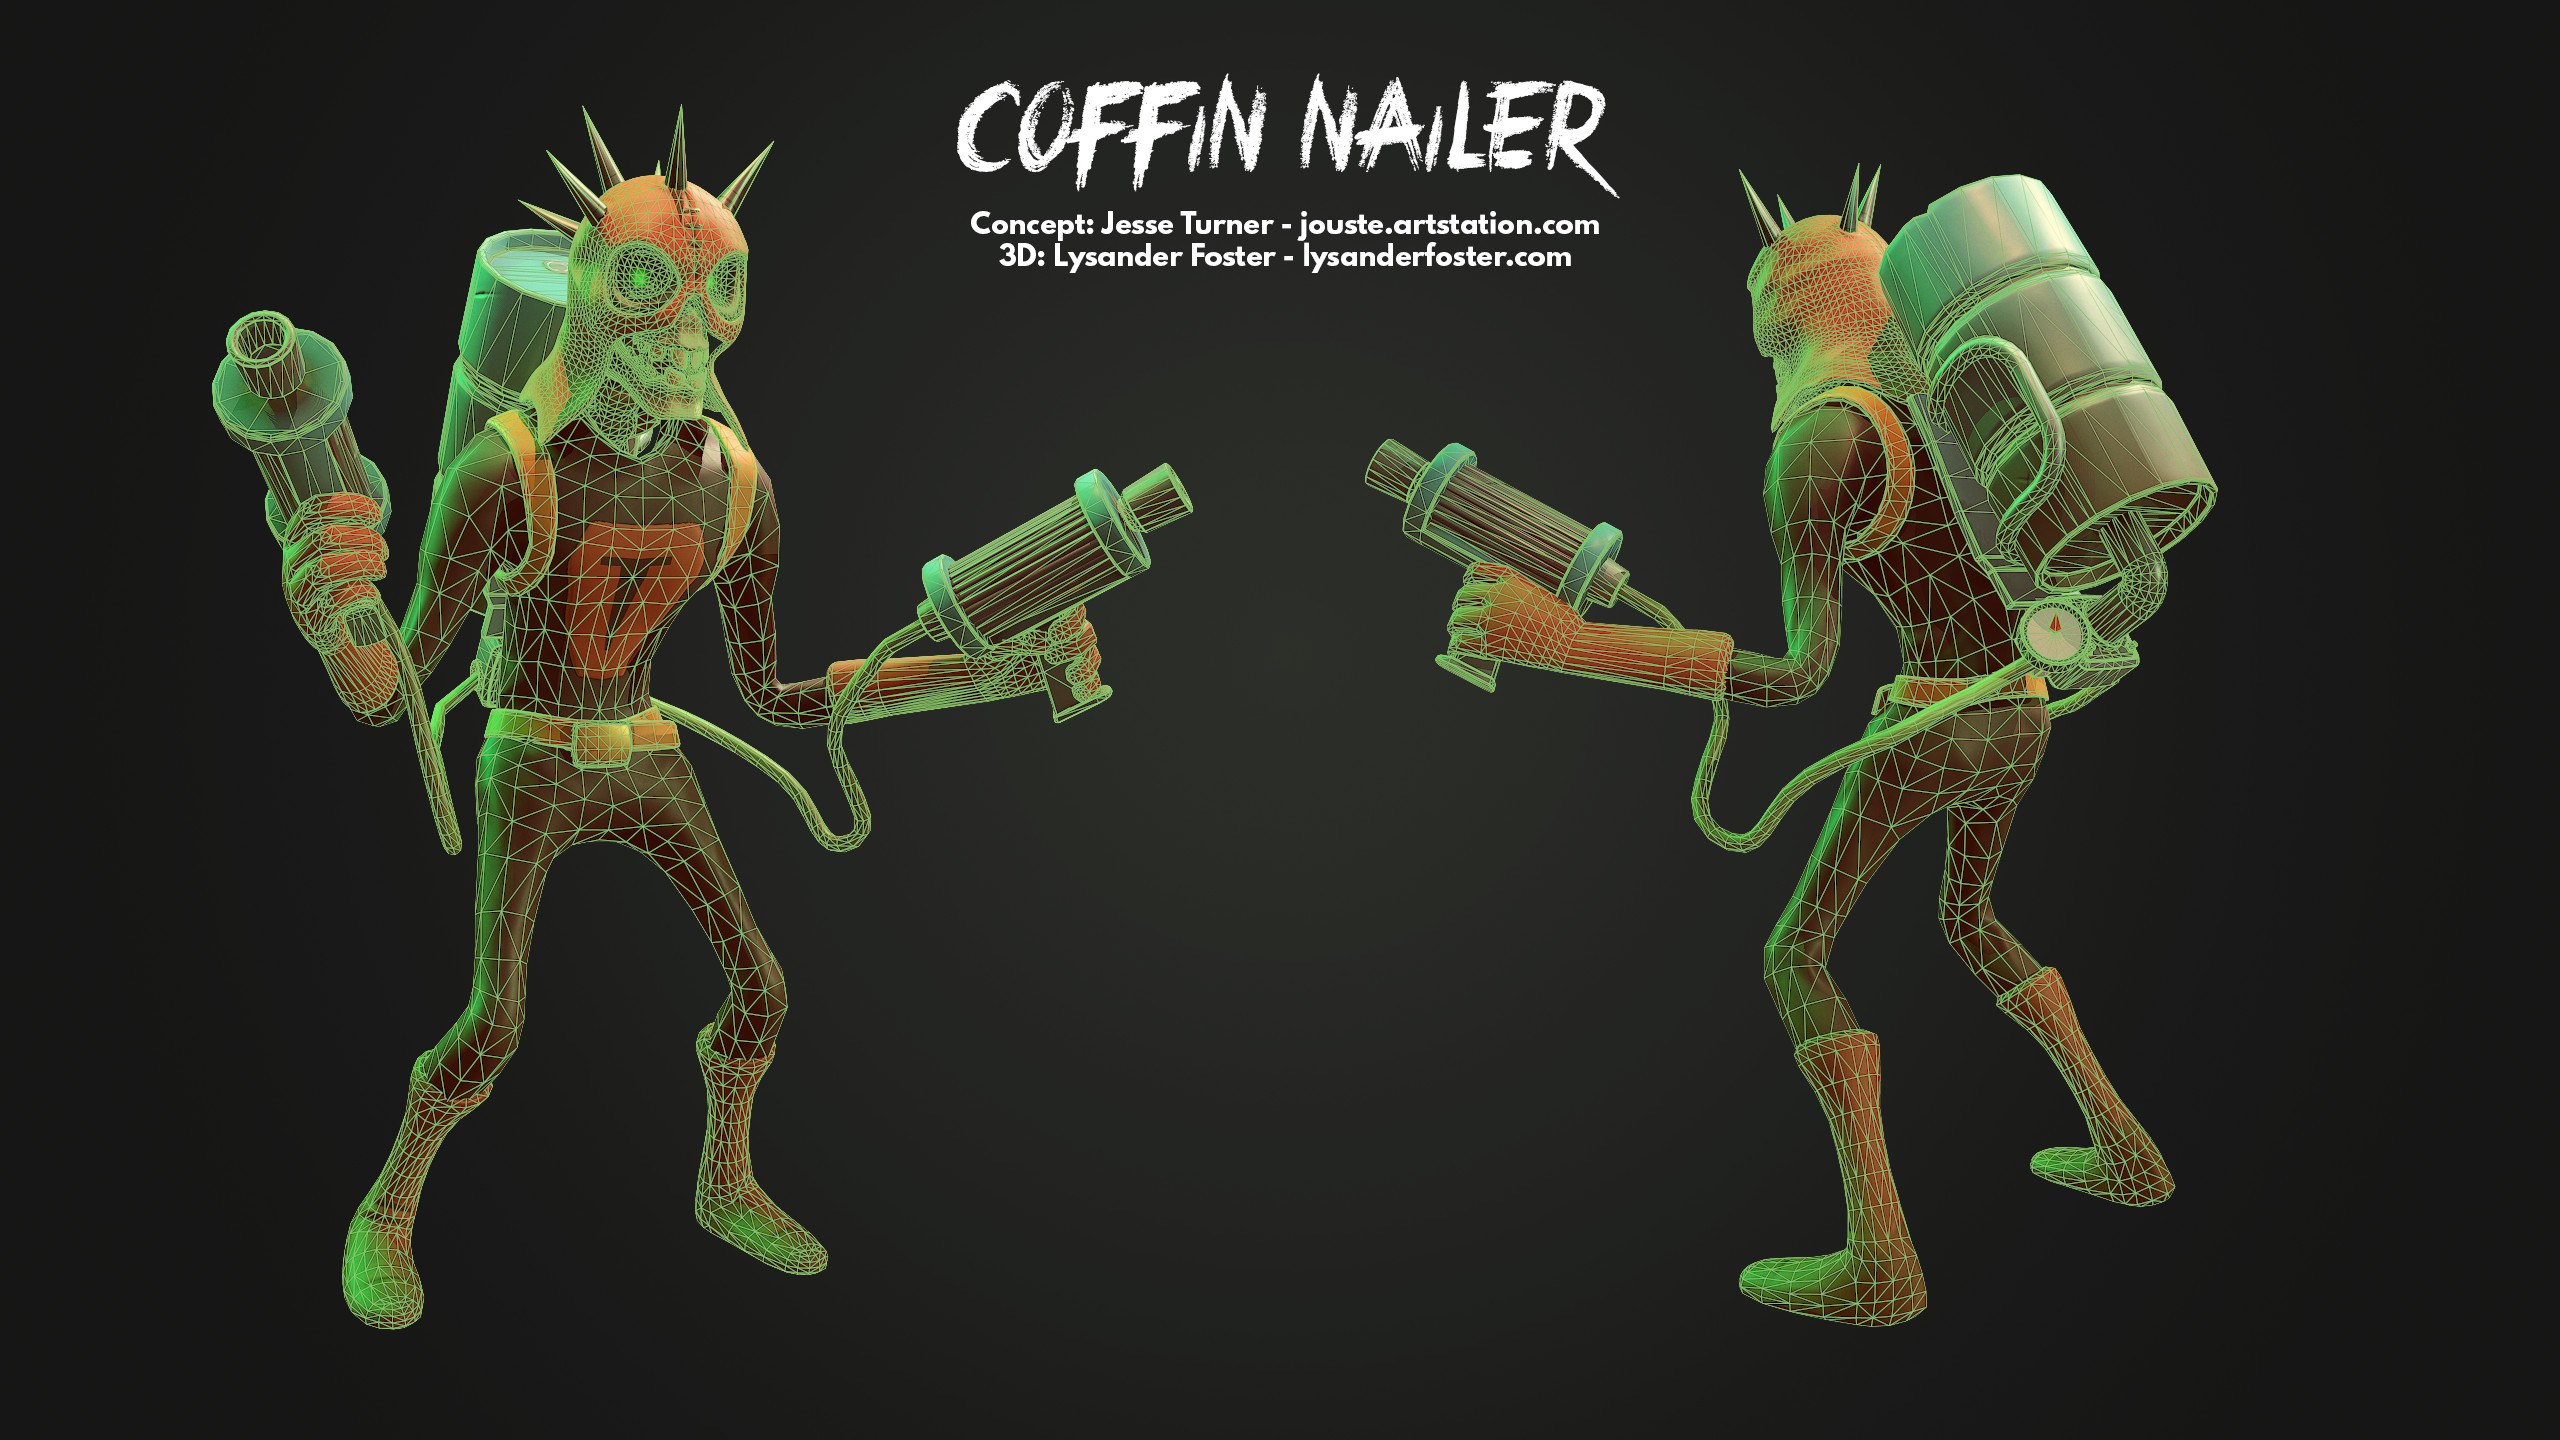 Wireframe of the Nailer himself, posed with his backpack using a modified CAT rig with 2 extra tails to link the pistols.